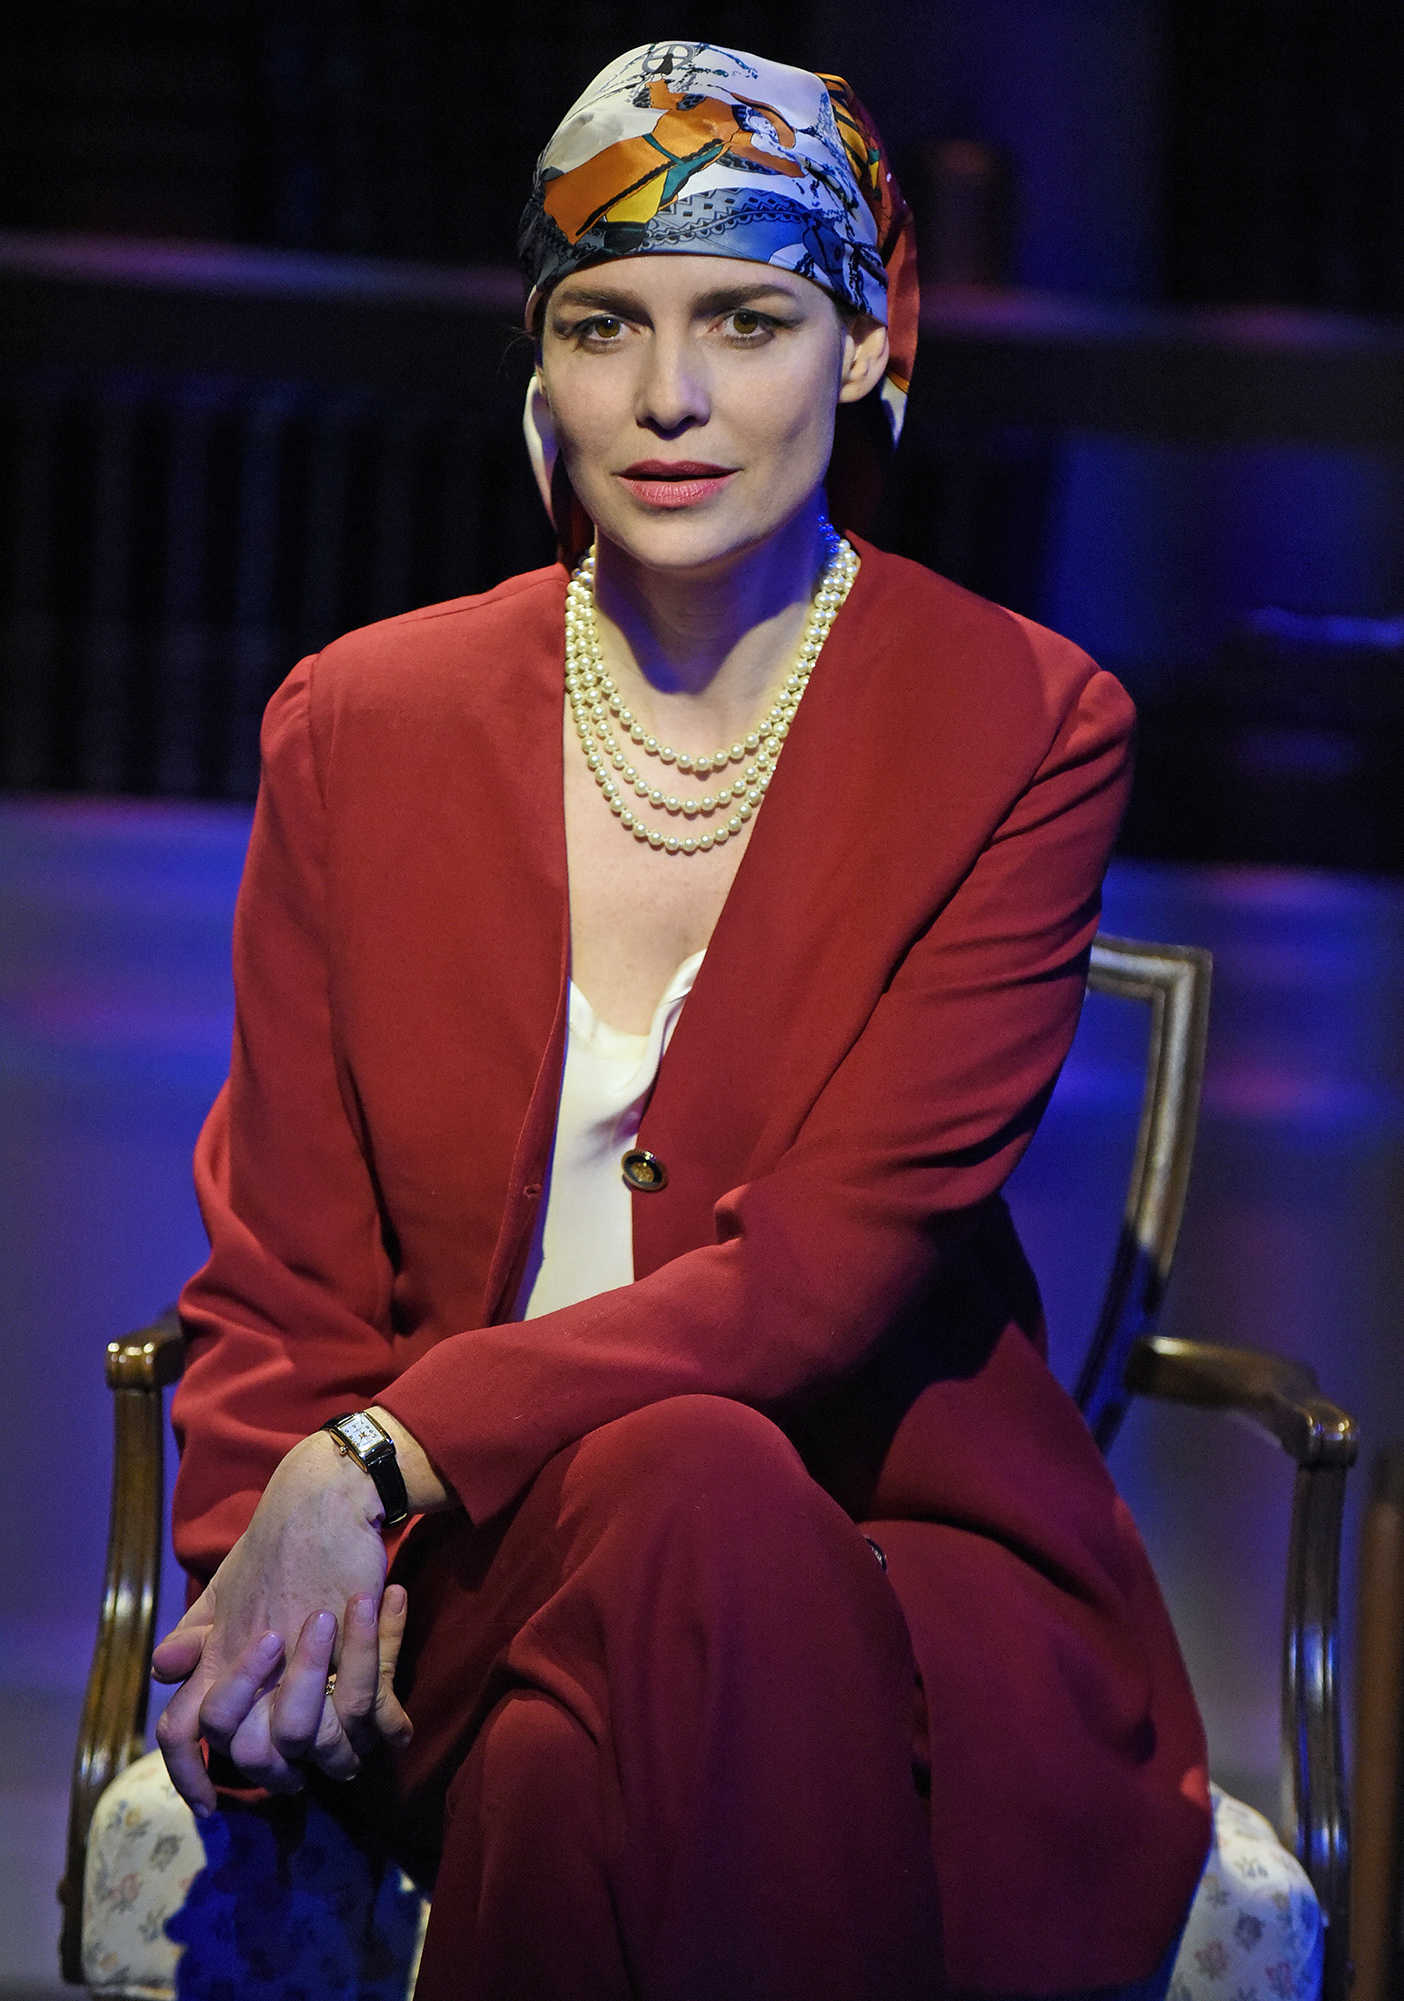 Jackie Unveiled at the Wallis Annenberg Center for the Performing Arts. Pictured: Saffron Burrows. Photo credit: Kevin Parry.